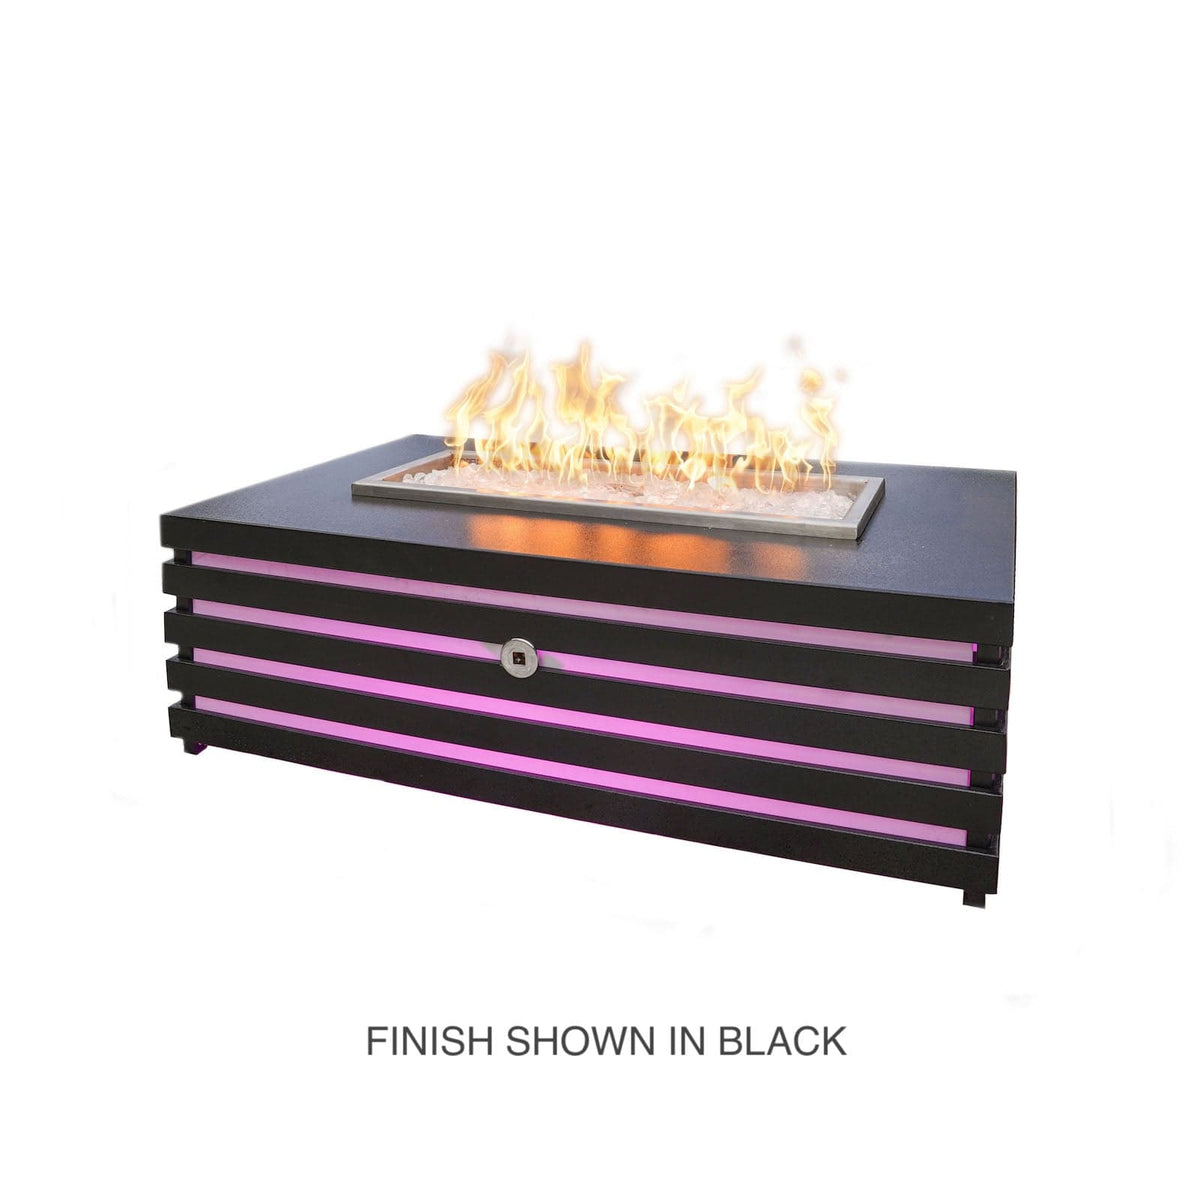 The Outdoor Plus Fire Features The Outdoor Plus 48&quot; Amina Powder Coated Fire Pit / OPT-AMI4824, OPT-AMI4824FSML, OPT-AMI4824FSEN, OPT-AMI4824E12V, OPT-AMI4824EKIT